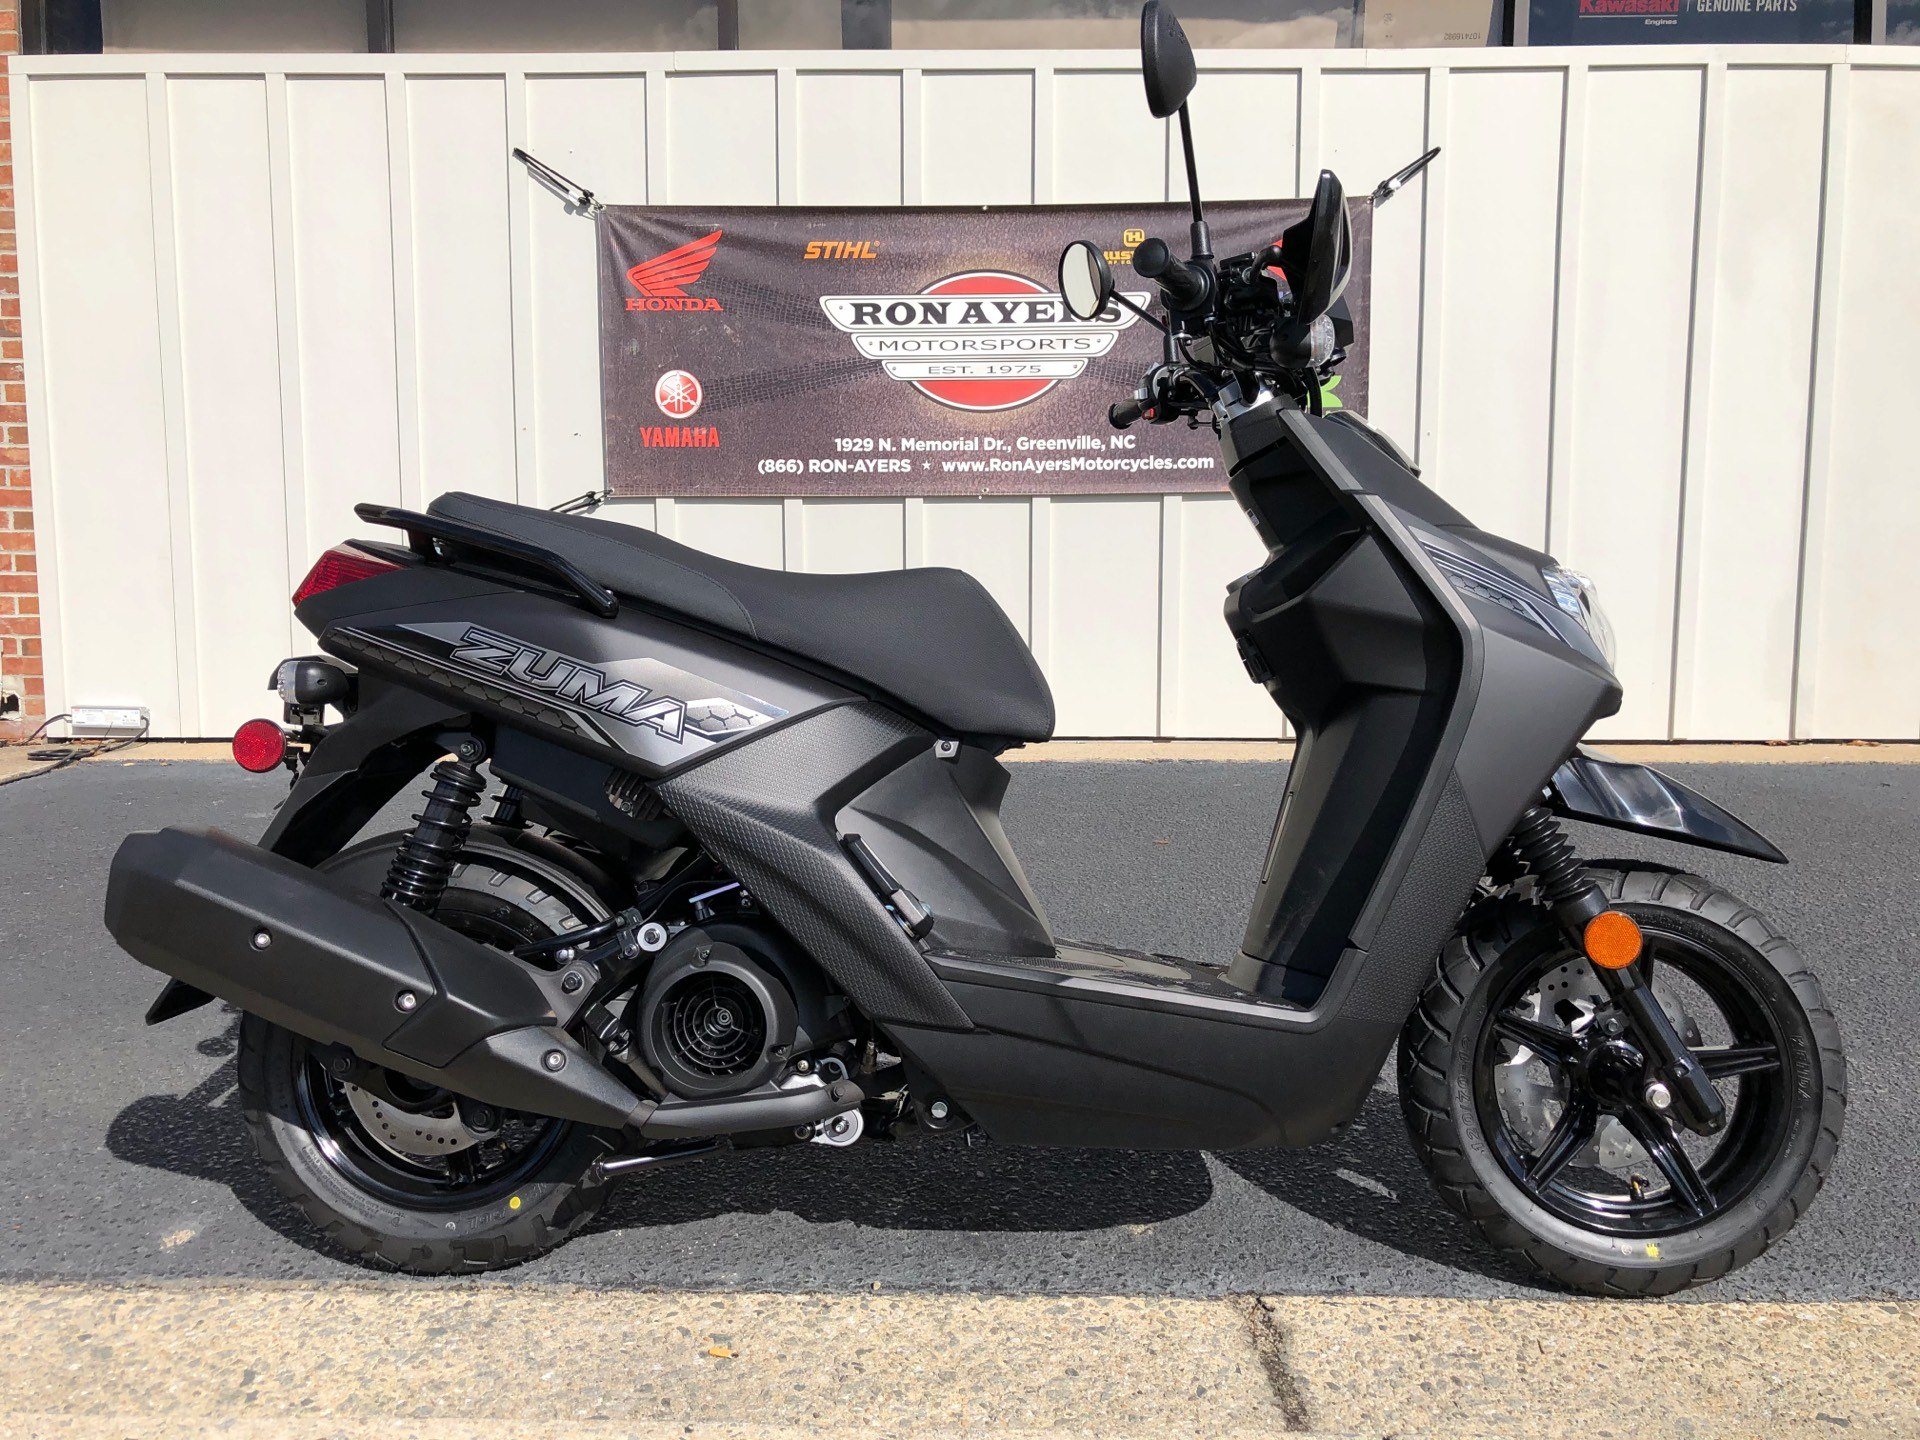 New 2020 Yamaha Zuma 125 Scooters In Greenville Nc Stock Number